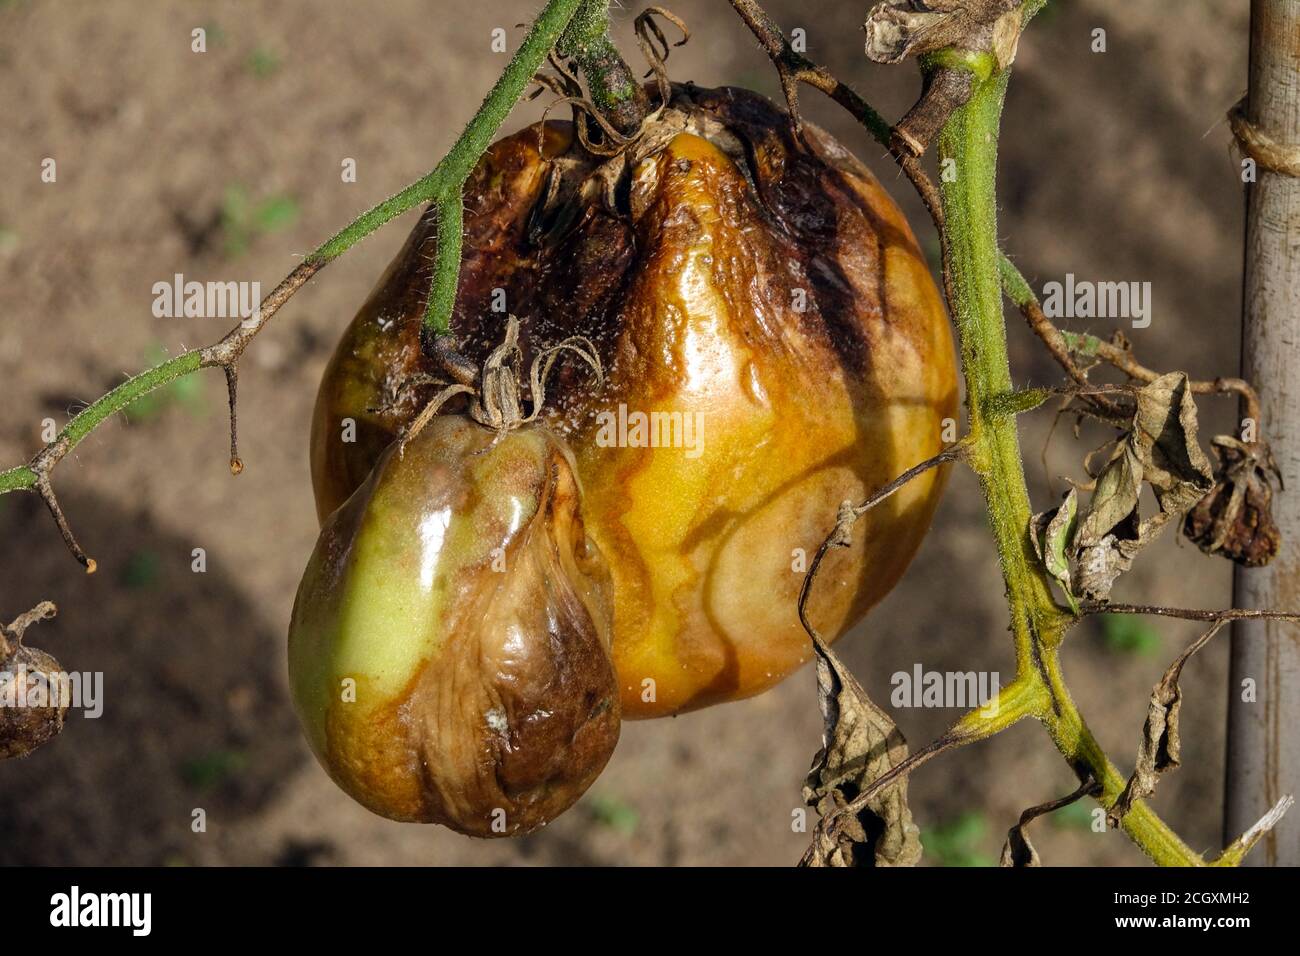 Phytophthora infestans Tomate blight Tomate plant disease ungesunde Pflanze Stockfoto